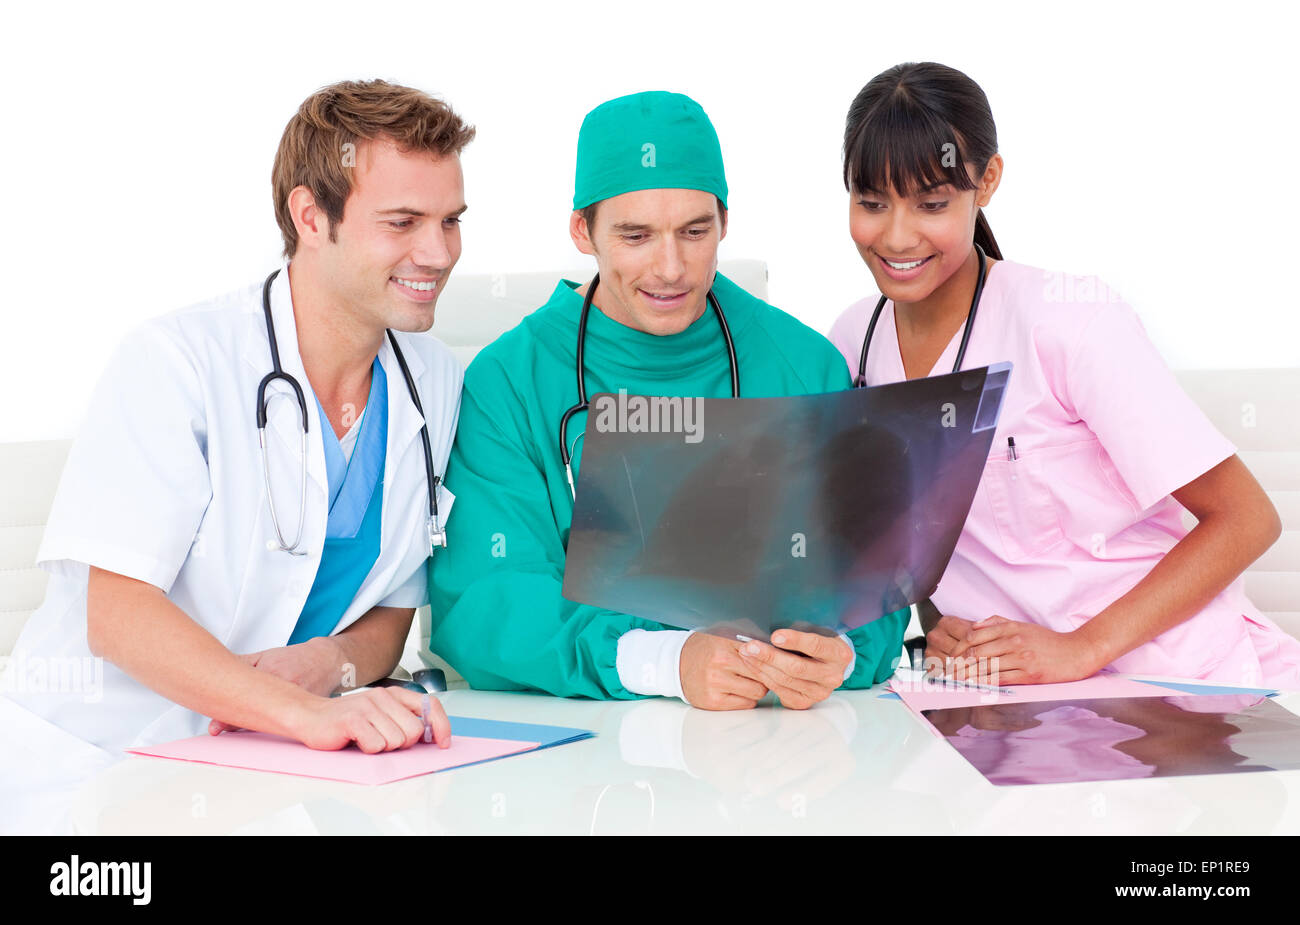 Positive medical team looking at an X-ray against a white background Stock Photo